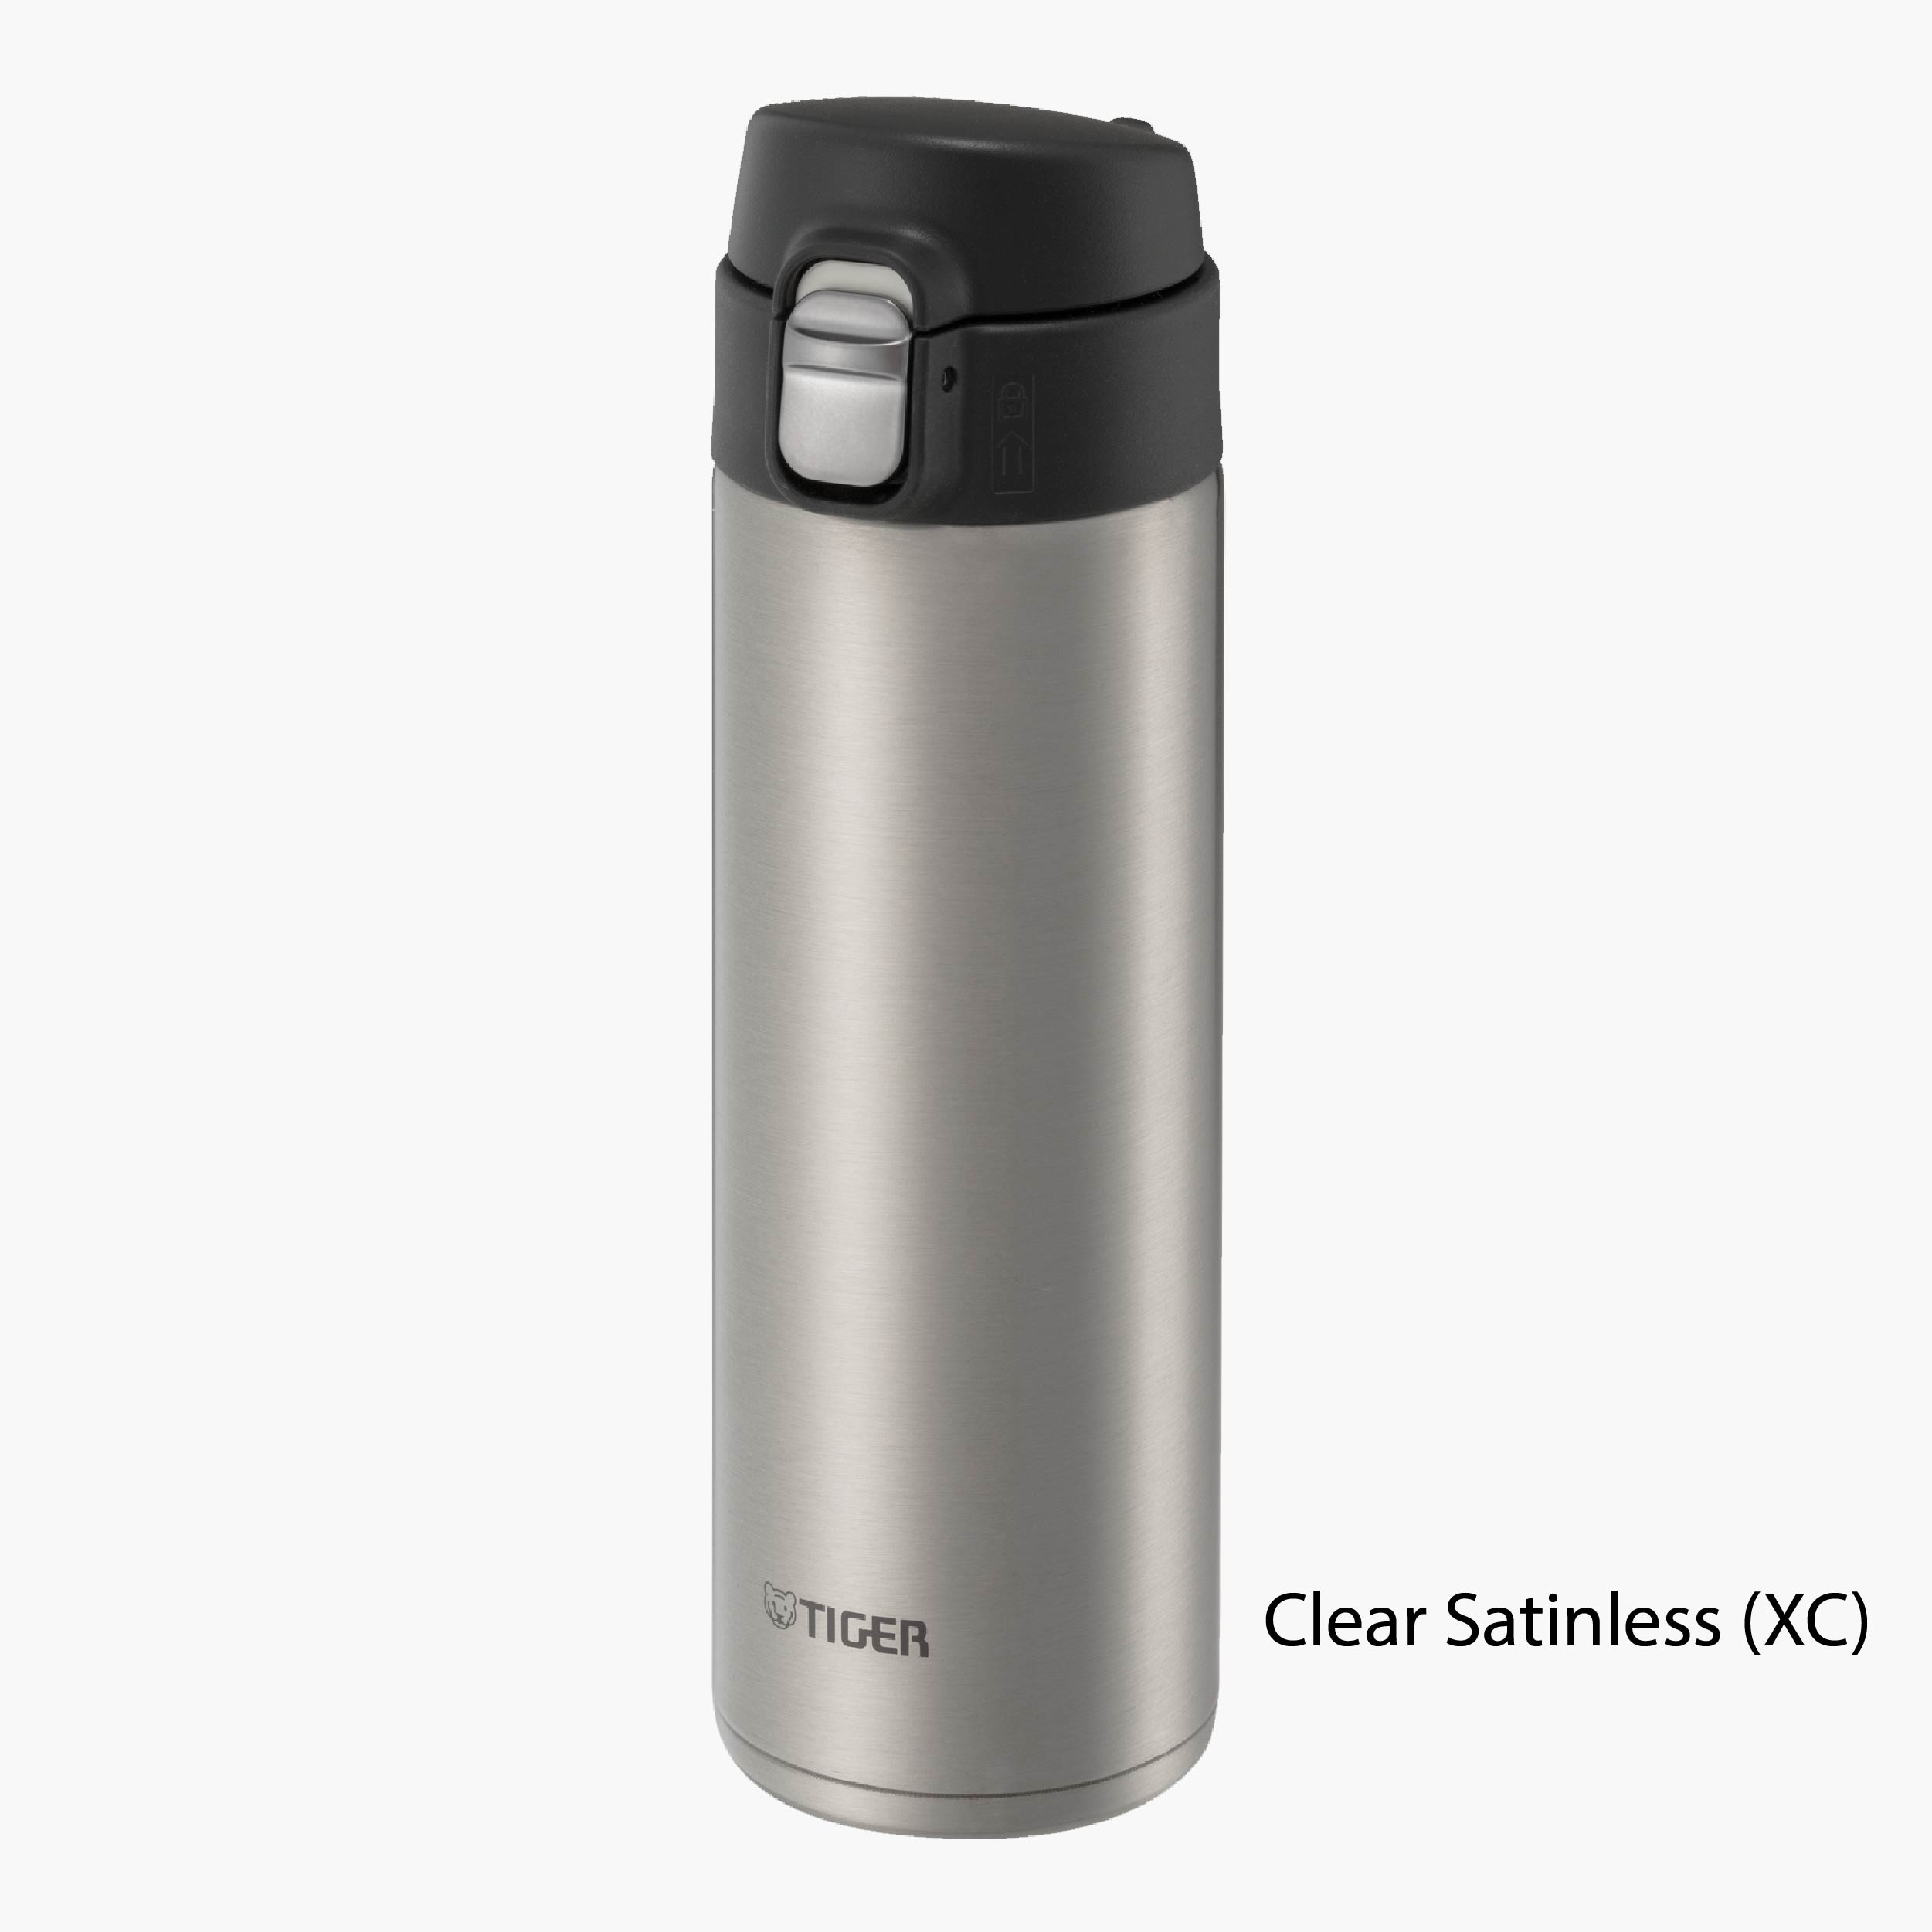 Tiger Thermos Water Bottle 2L Cup Large Capacity Type MHK-A201-XC Tiger 